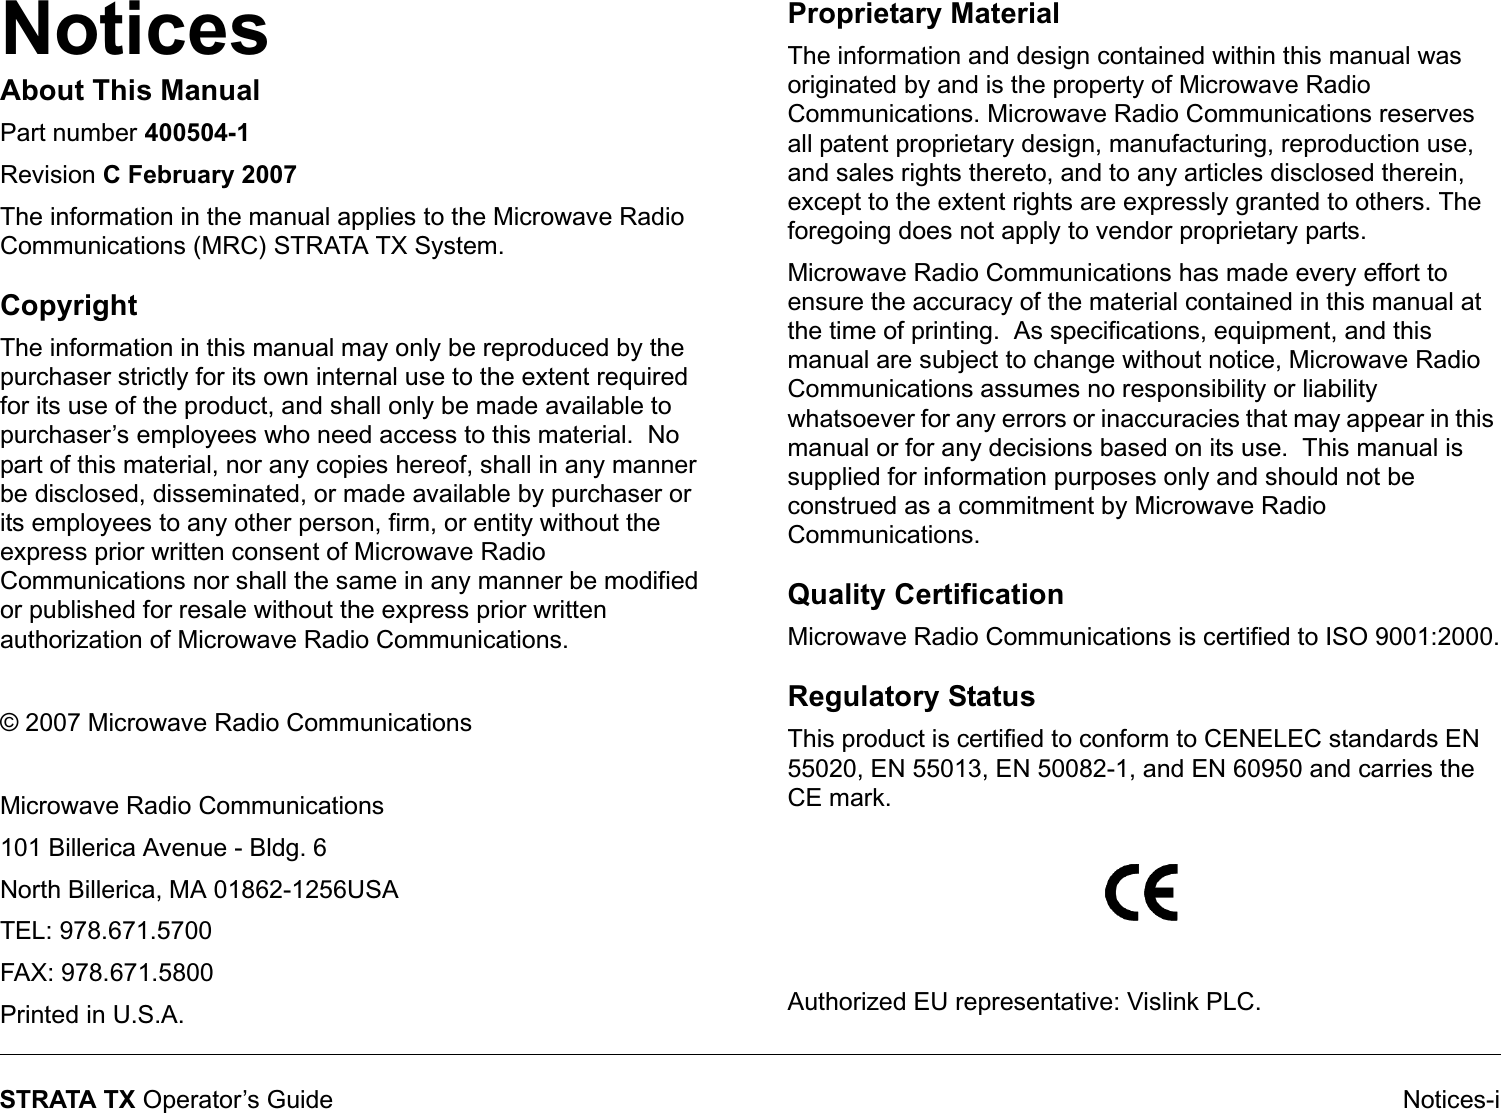 Notices Notices-iSTRATA TX Operator’s GuideAbout This ManualPart number 400504-1Revision C February 2007The information in the manual applies to the Microwave Radio Communications (MRC) STRATA TX System. CopyrightThe information in this manual may only be reproduced by the purchaser strictly for its own internal use to the extent required for its use of the product, and shall only be made available to purchaser’s employees who need access to this material.  No part of this material, nor any copies hereof, shall in any manner be disclosed, disseminated, or made available by purchaser or its employees to any other person, firm, or entity without the express prior written consent of Microwave Radio Communications nor shall the same in any manner be modified or published for resale without the express prior written authorization of Microwave Radio Communications. © 2007 Microwave Radio Communications Microwave Radio Communications101 Billerica Avenue - Bldg. 6North Billerica, MA 01862-1256USATEL: 978.671.5700FAX: 978.671.5800Printed in U.S.A.Proprietary MaterialThe information and design contained within this manual was originated by and is the property of Microwave Radio Communications. Microwave Radio Communications reserves all patent proprietary design, manufacturing, reproduction use, and sales rights thereto, and to any articles disclosed therein, except to the extent rights are expressly granted to others. The foregoing does not apply to vendor proprietary parts.Microwave Radio Communications has made every effort to ensure the accuracy of the material contained in this manual at the time of printing.  As specifications, equipment, and this manual are subject to change without notice, Microwave Radio Communications assumes no responsibility or liability whatsoever for any errors or inaccuracies that may appear in this manual or for any decisions based on its use.  This manual is supplied for information purposes only and should not be construed as a commitment by Microwave Radio Communications.Quality CertificationMicrowave Radio Communications is certified to ISO 9001:2000.Regulatory StatusThis product is certified to conform to CENELEC standards EN 55020, EN 55013, EN 50082-1, and EN 60950 and carries the CE mark.Authorized EU representative: Vislink PLC.